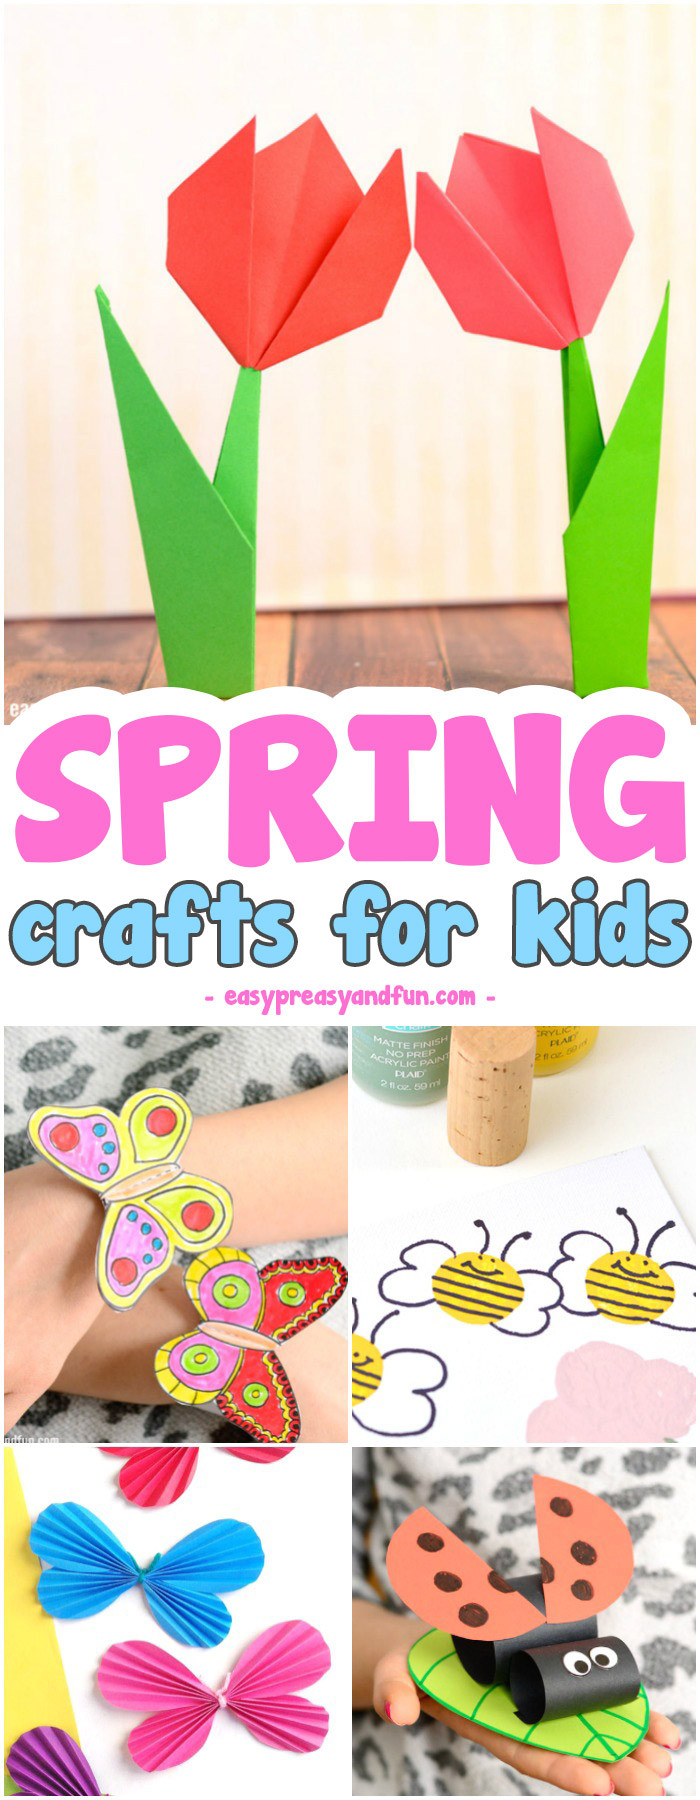 Project Ideas For Kids
 Spring Crafts for Kids Art and Craft Project Ideas for